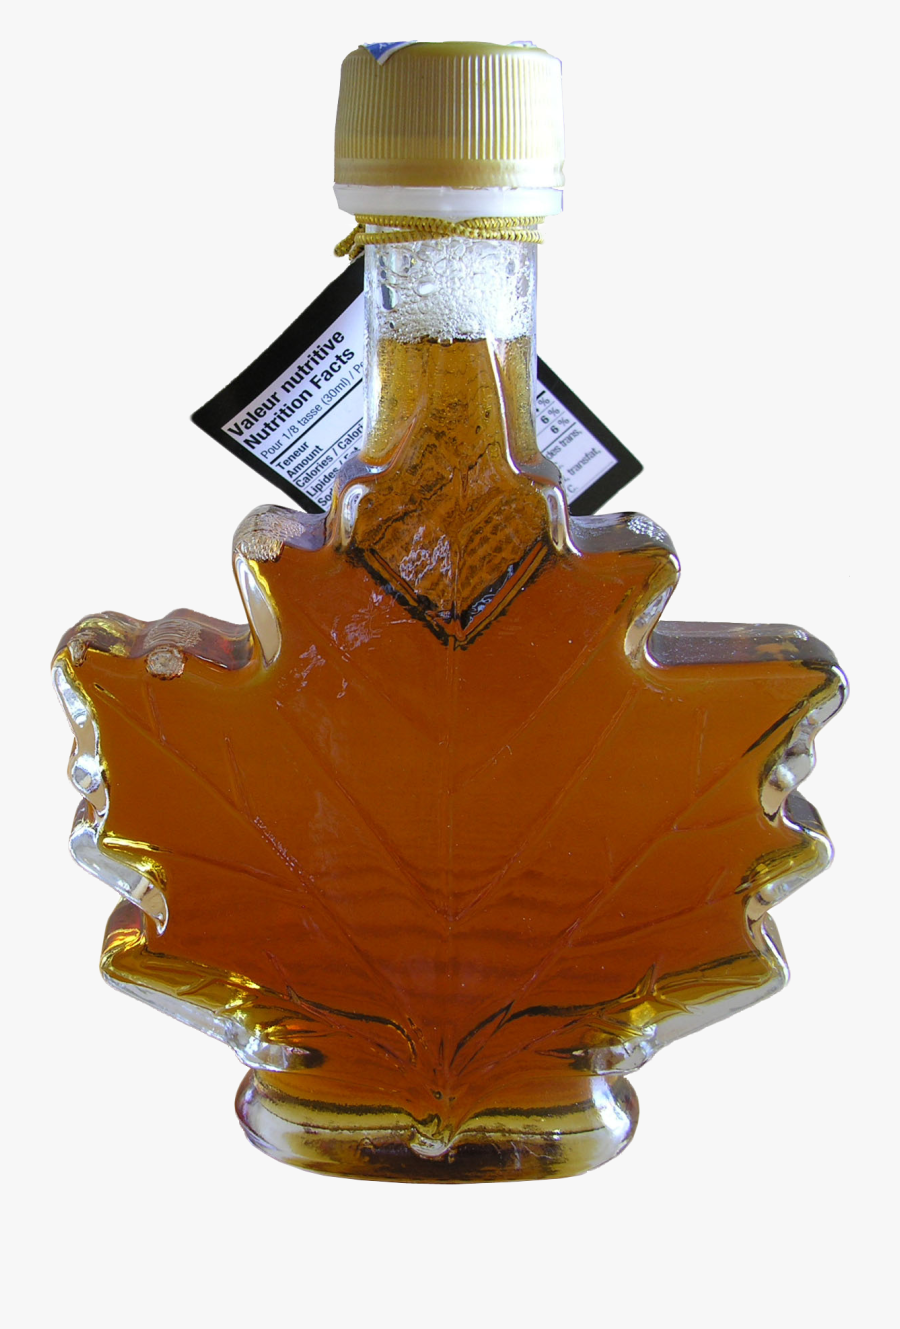 Real Maple Syrup Png, Transparent Clipart